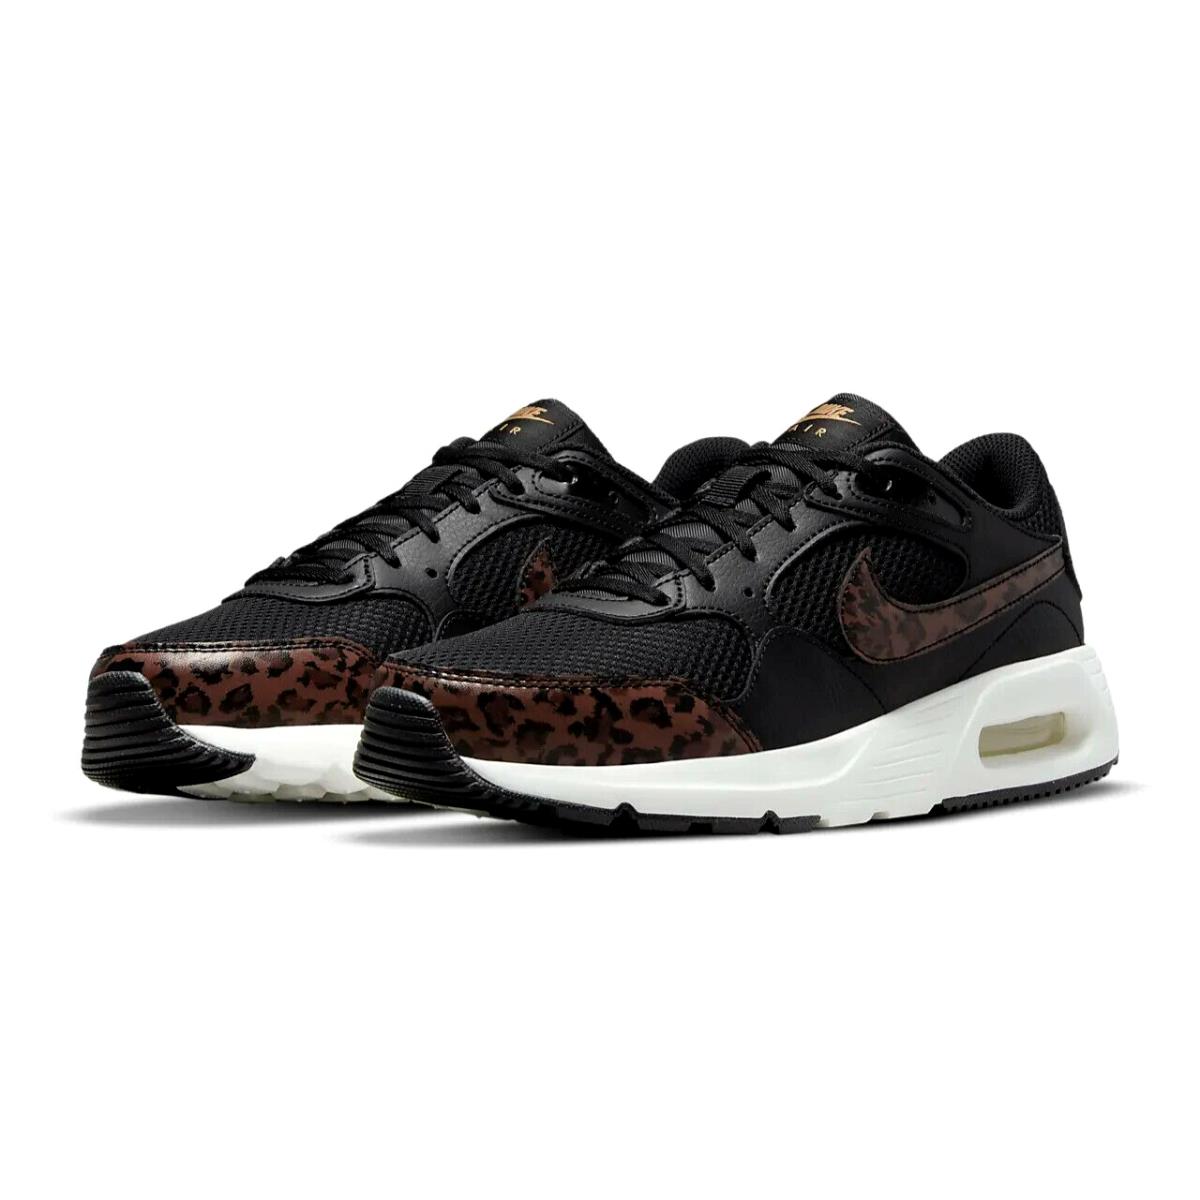 Nike Air Max SC Womens Size 11.5 Sneaker Shoes DO2785 010 Black Archaeo Brown